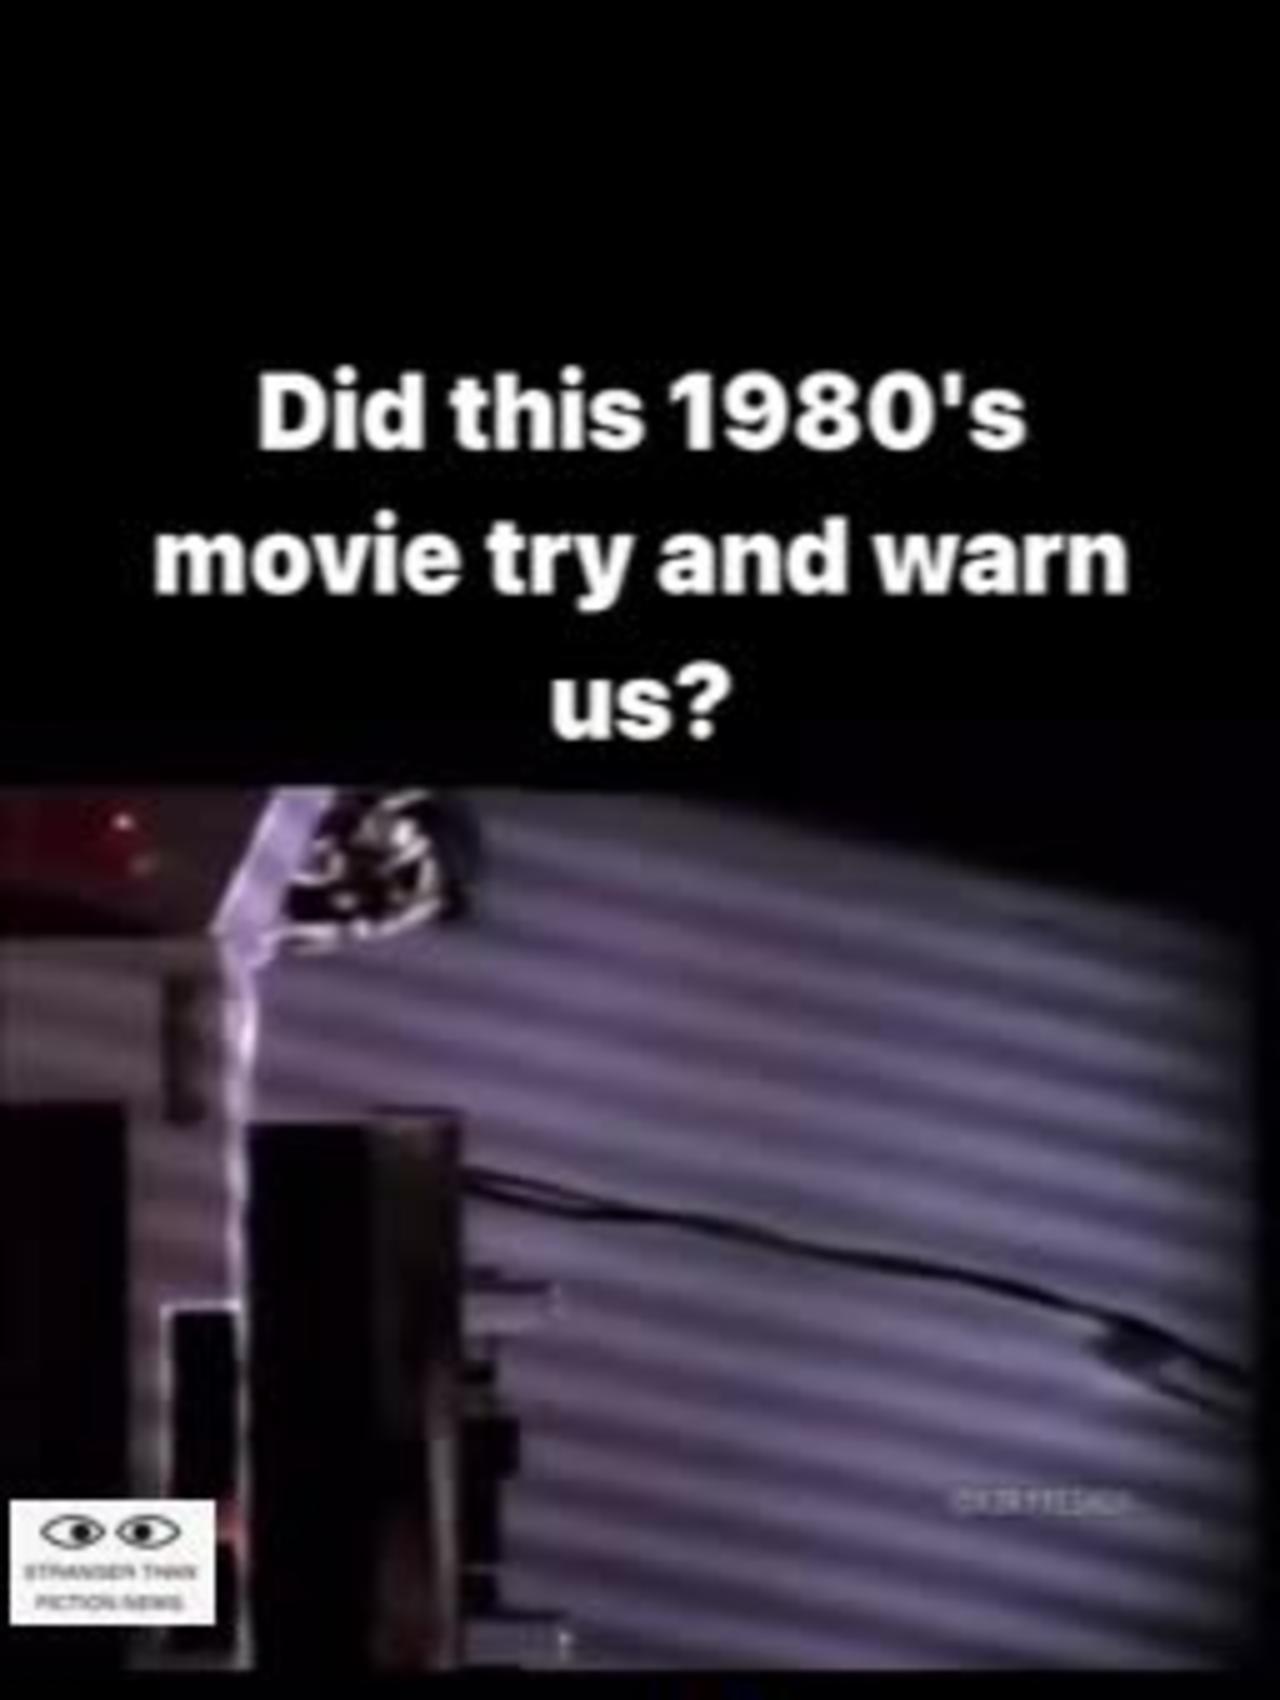 Here’s a clip of a 1981 film 'Early Warning'. - Predictive Programming!